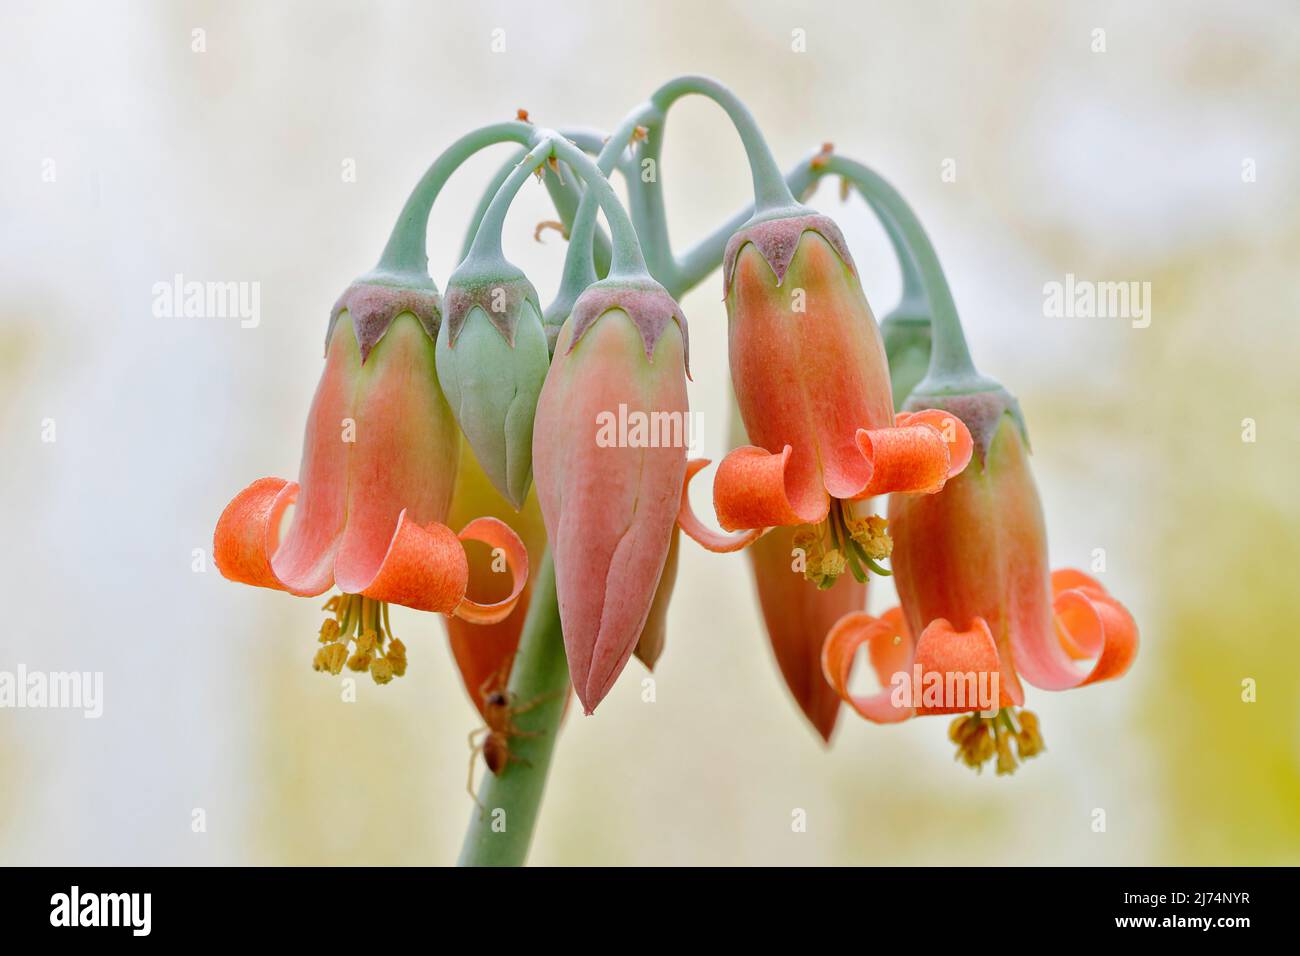 Coral berry, Coral bells, Coral bell plant, Winter bells (Kalanchoe rosei var. seyrigii), flowers Stock Photo